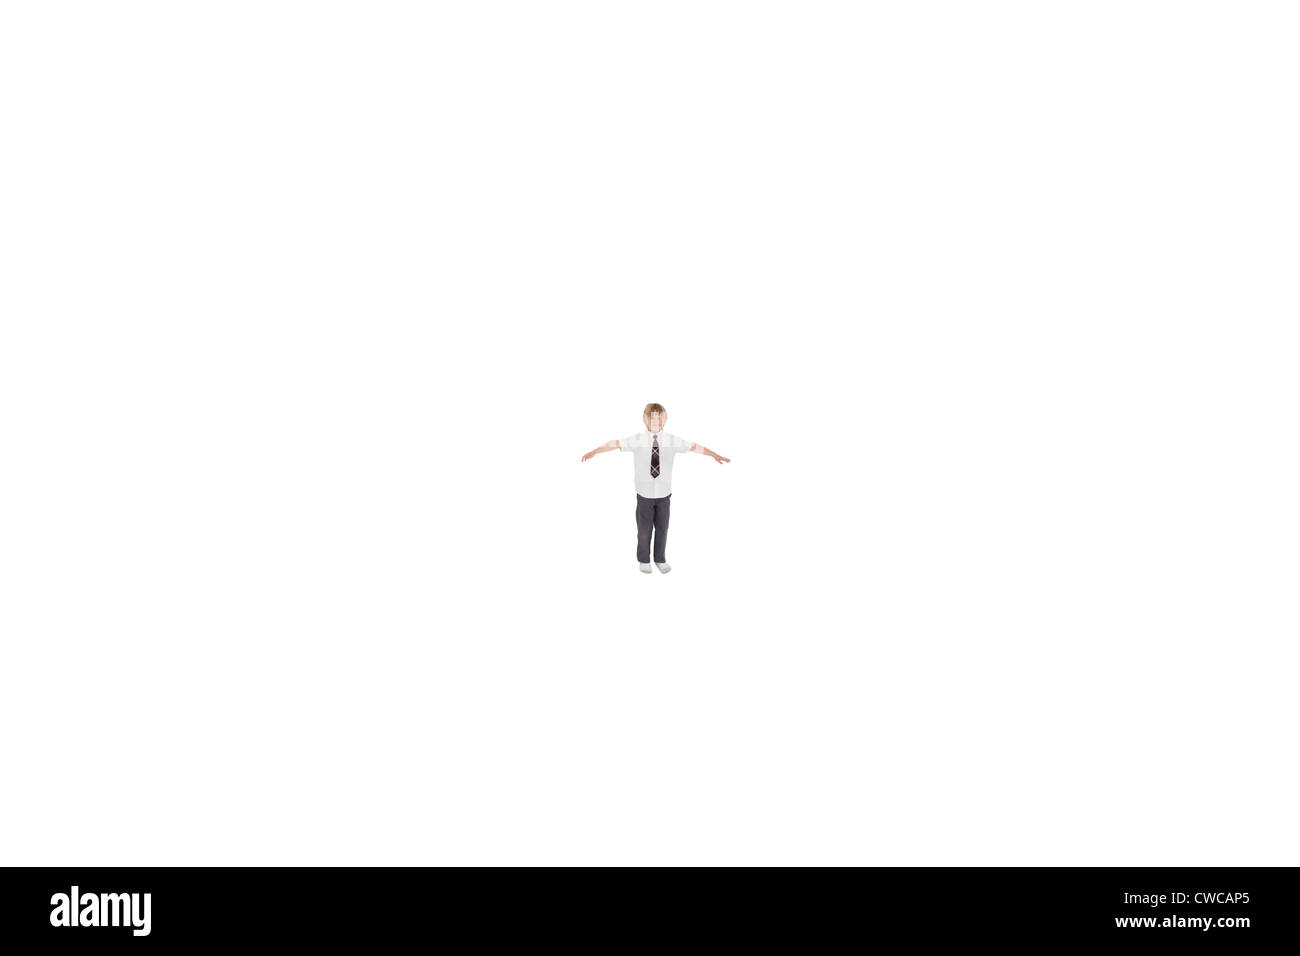 Elementary boy standing at distance with arms outstretched over white background Stock Photo